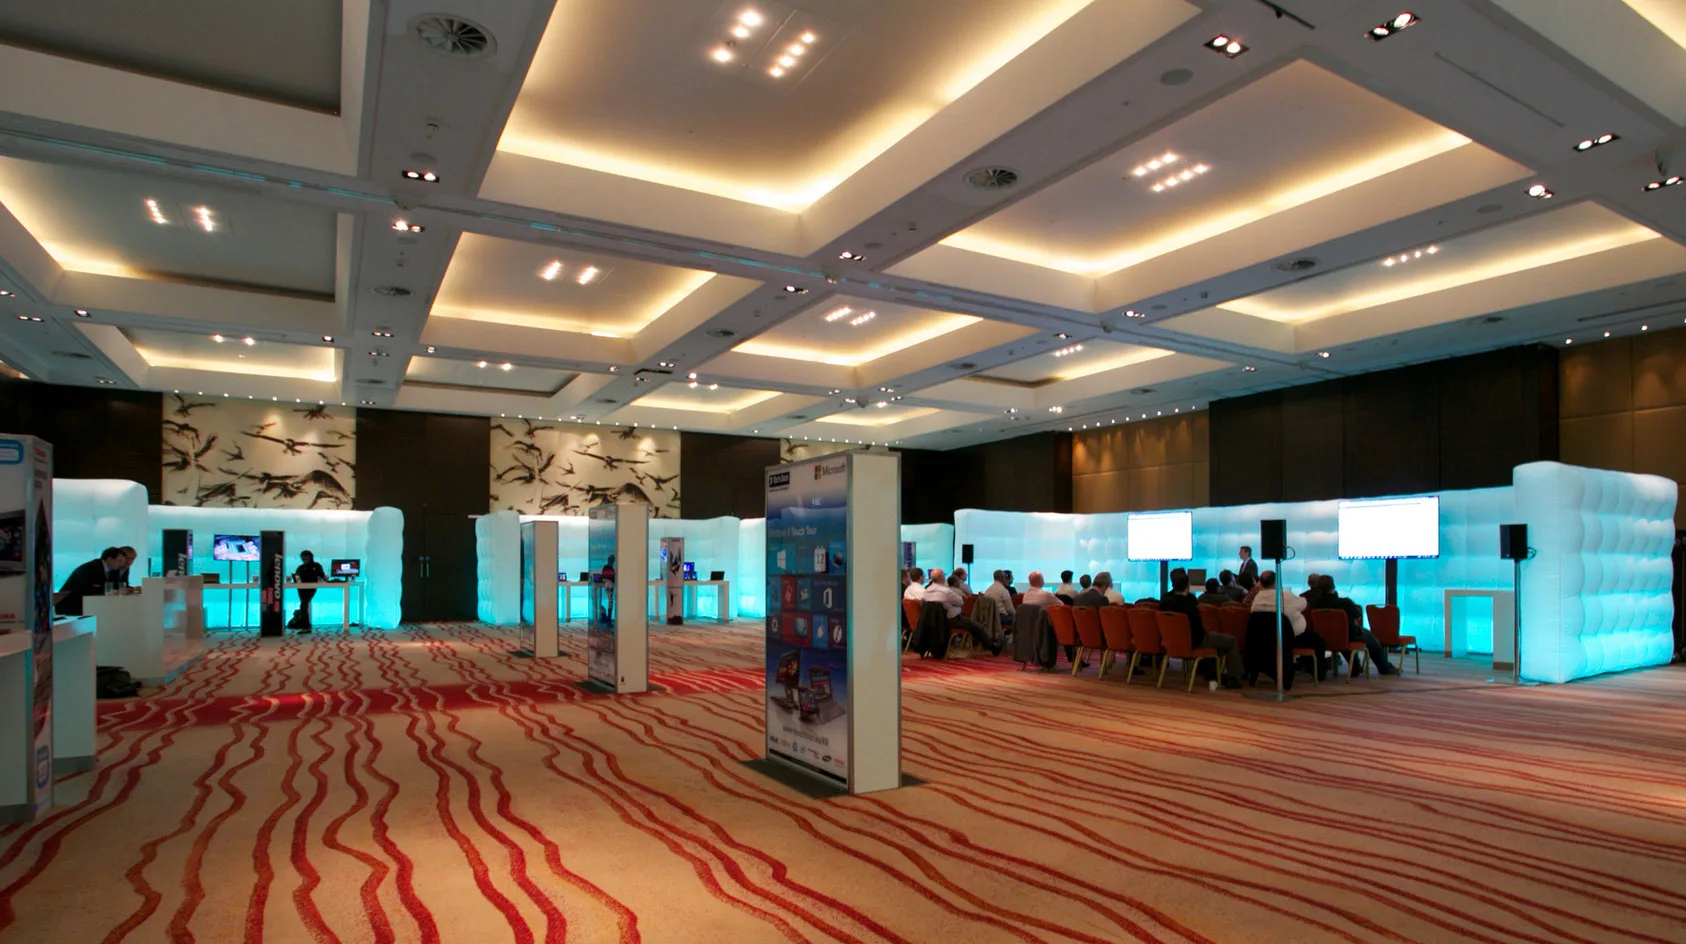 Pic showing several Created By Air Cubewalls used to divide up a presentation area at a large indoor event